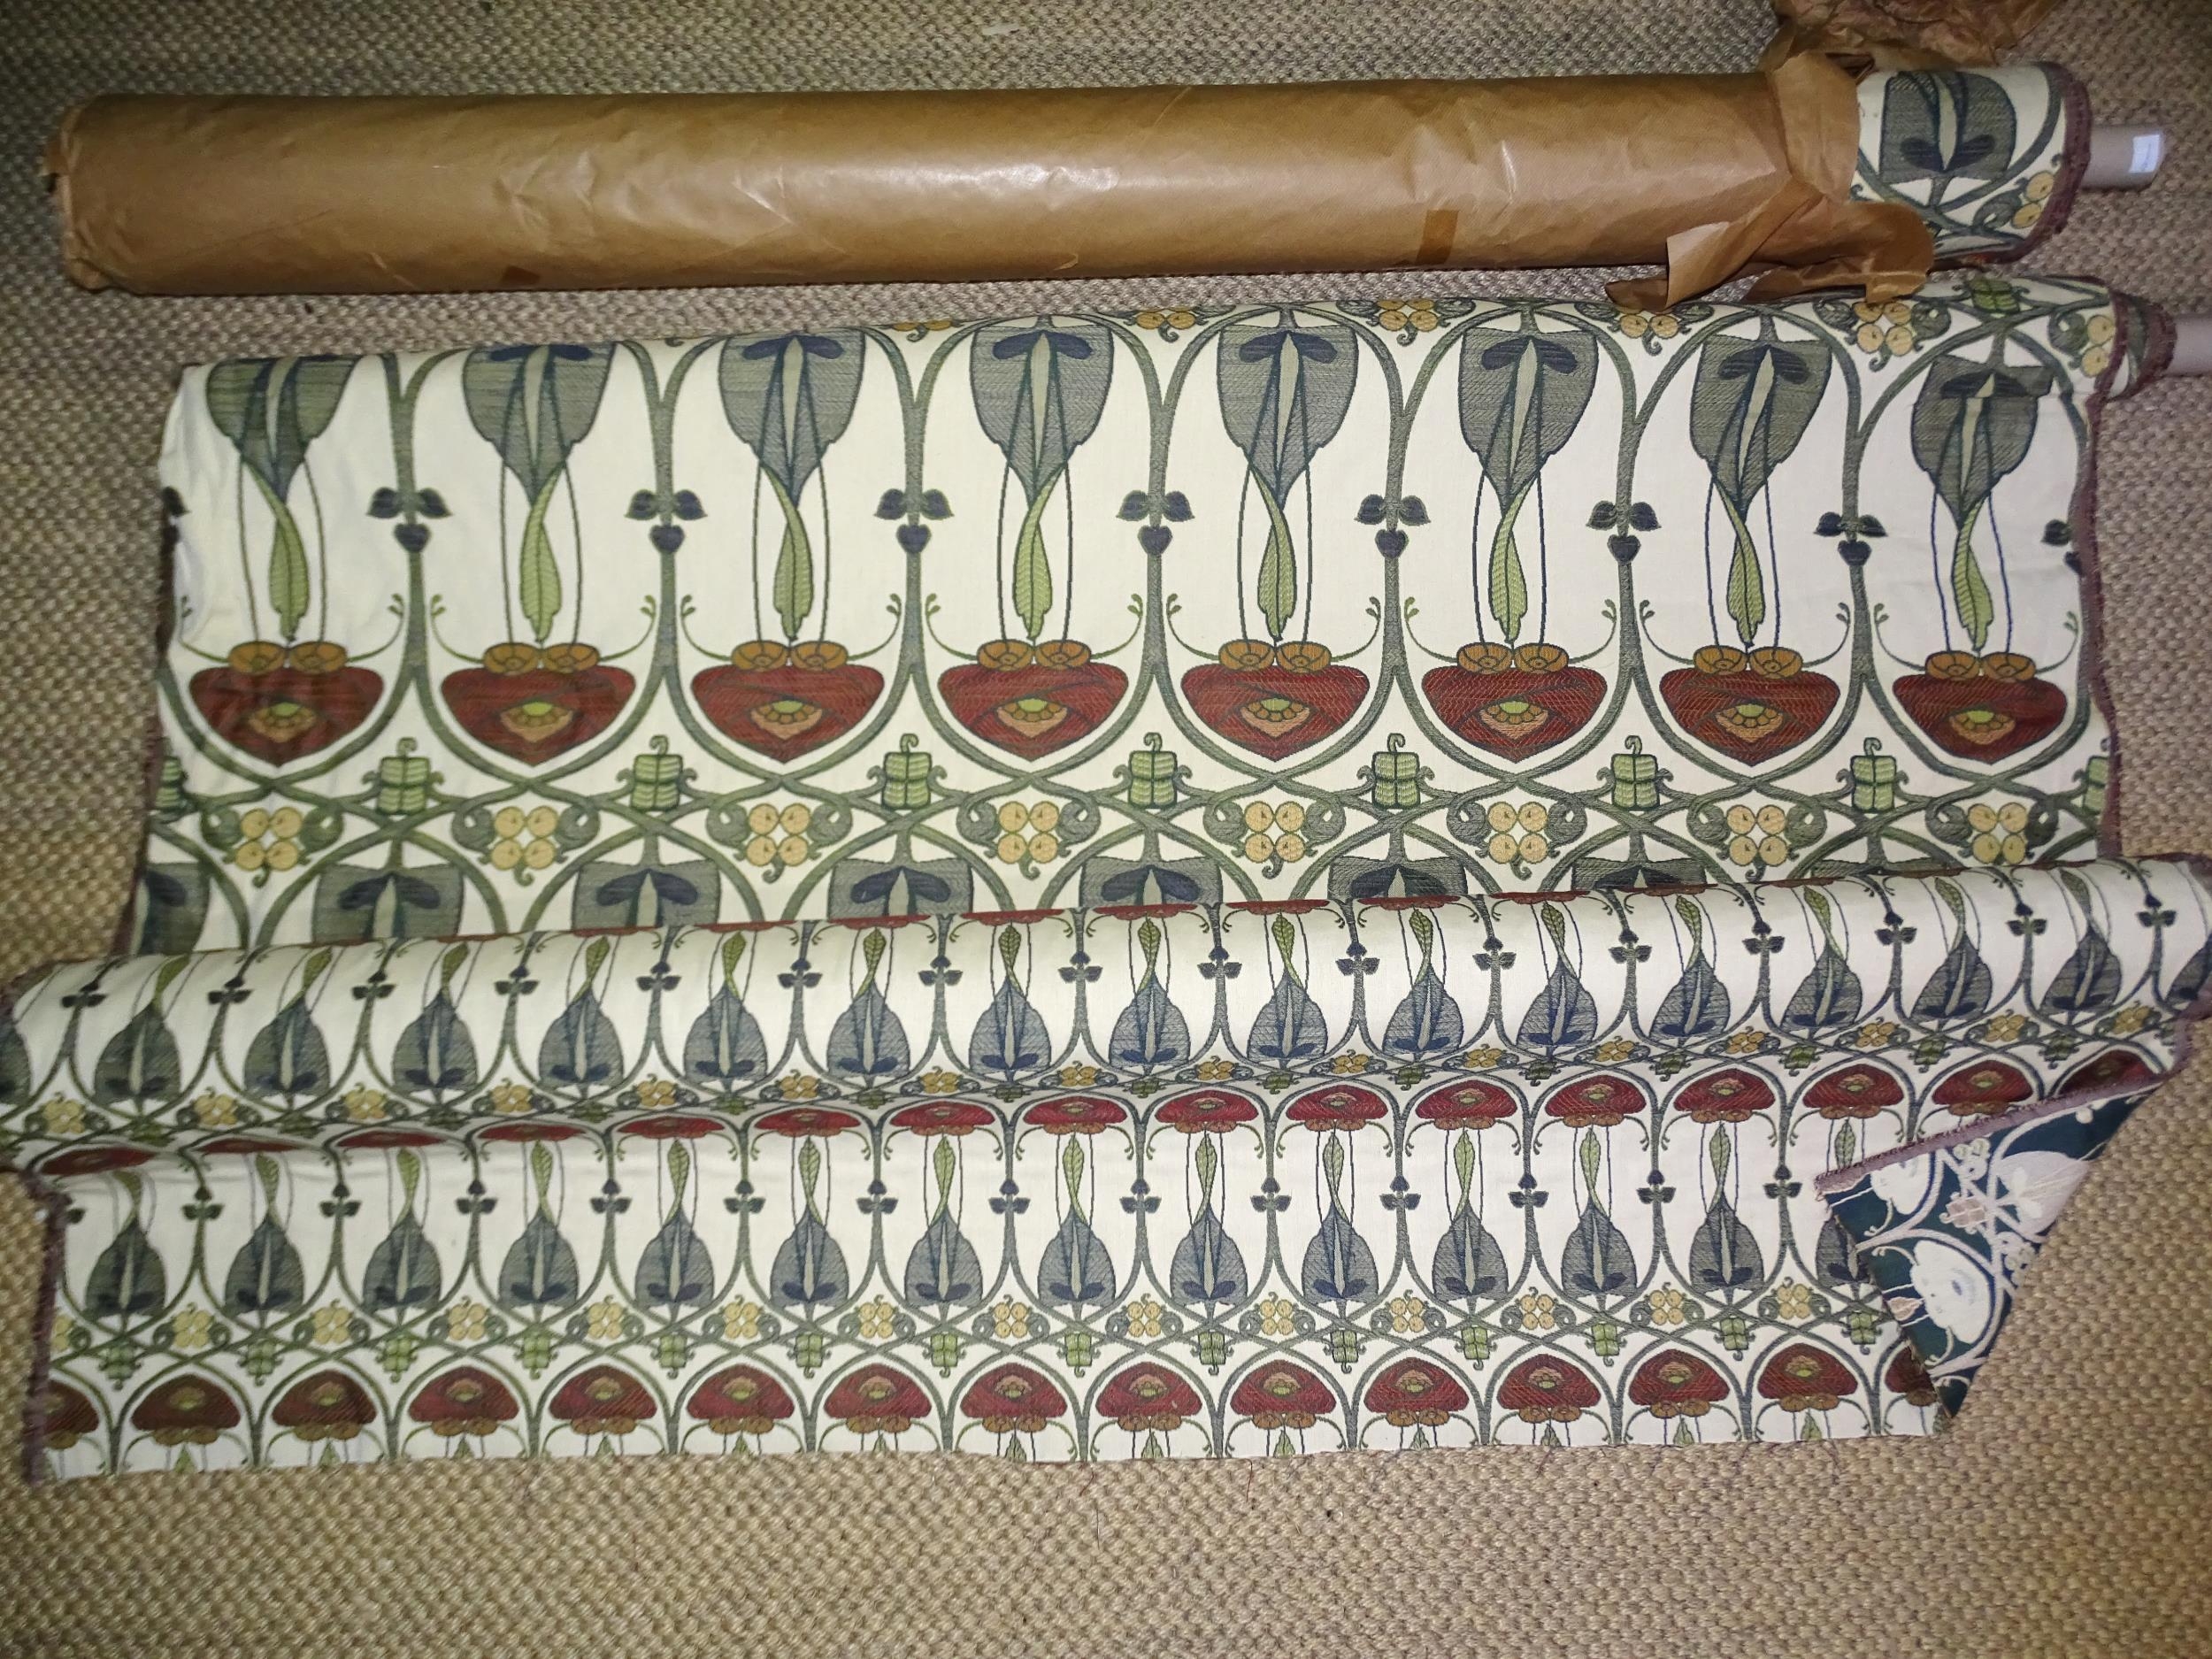 A quantity of William Morris-style tapestry weave furnishing fabric in three lengths, one and a half